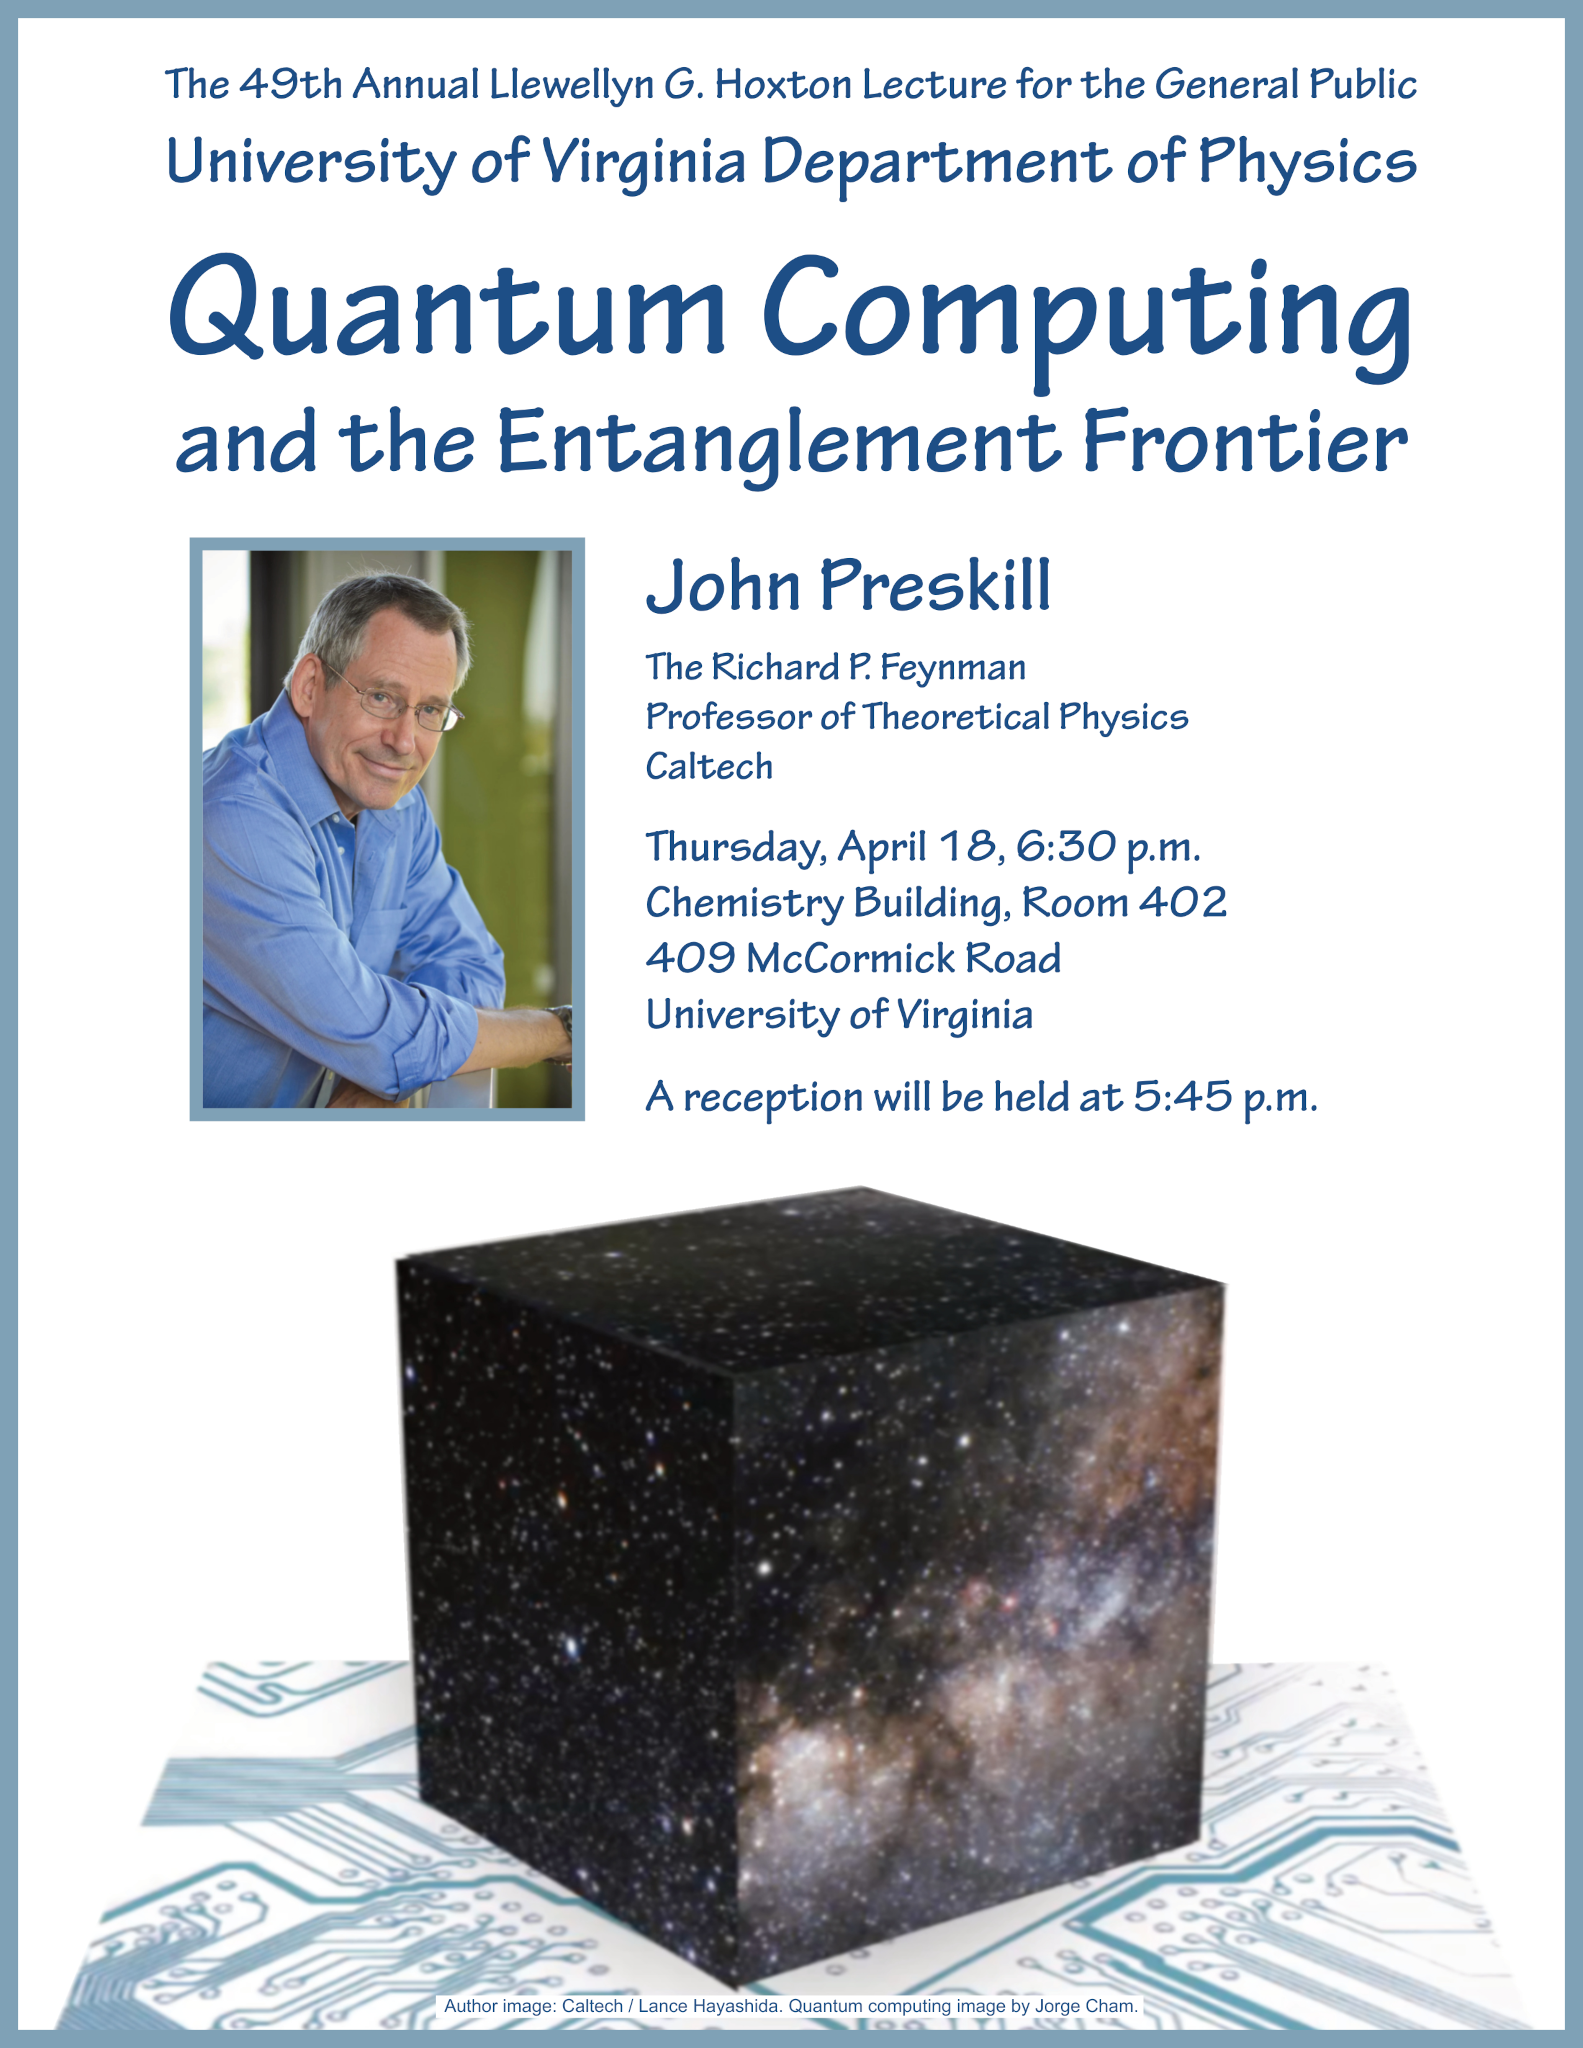 The 49th Annual Llewellyn G. Hoxton Lecture for the General Public University of Virginia Department of Physics Quantum Computing and the Entanglement Frontier. John Preskill The Richard P. Feynman Professor of Theoretical Physics Caltech Thursday, April 18, 6:30 p.m. Chemistry Building, Room 402 409 McCormick Road University of Virginia A reception will be held at 5:45 p.m.